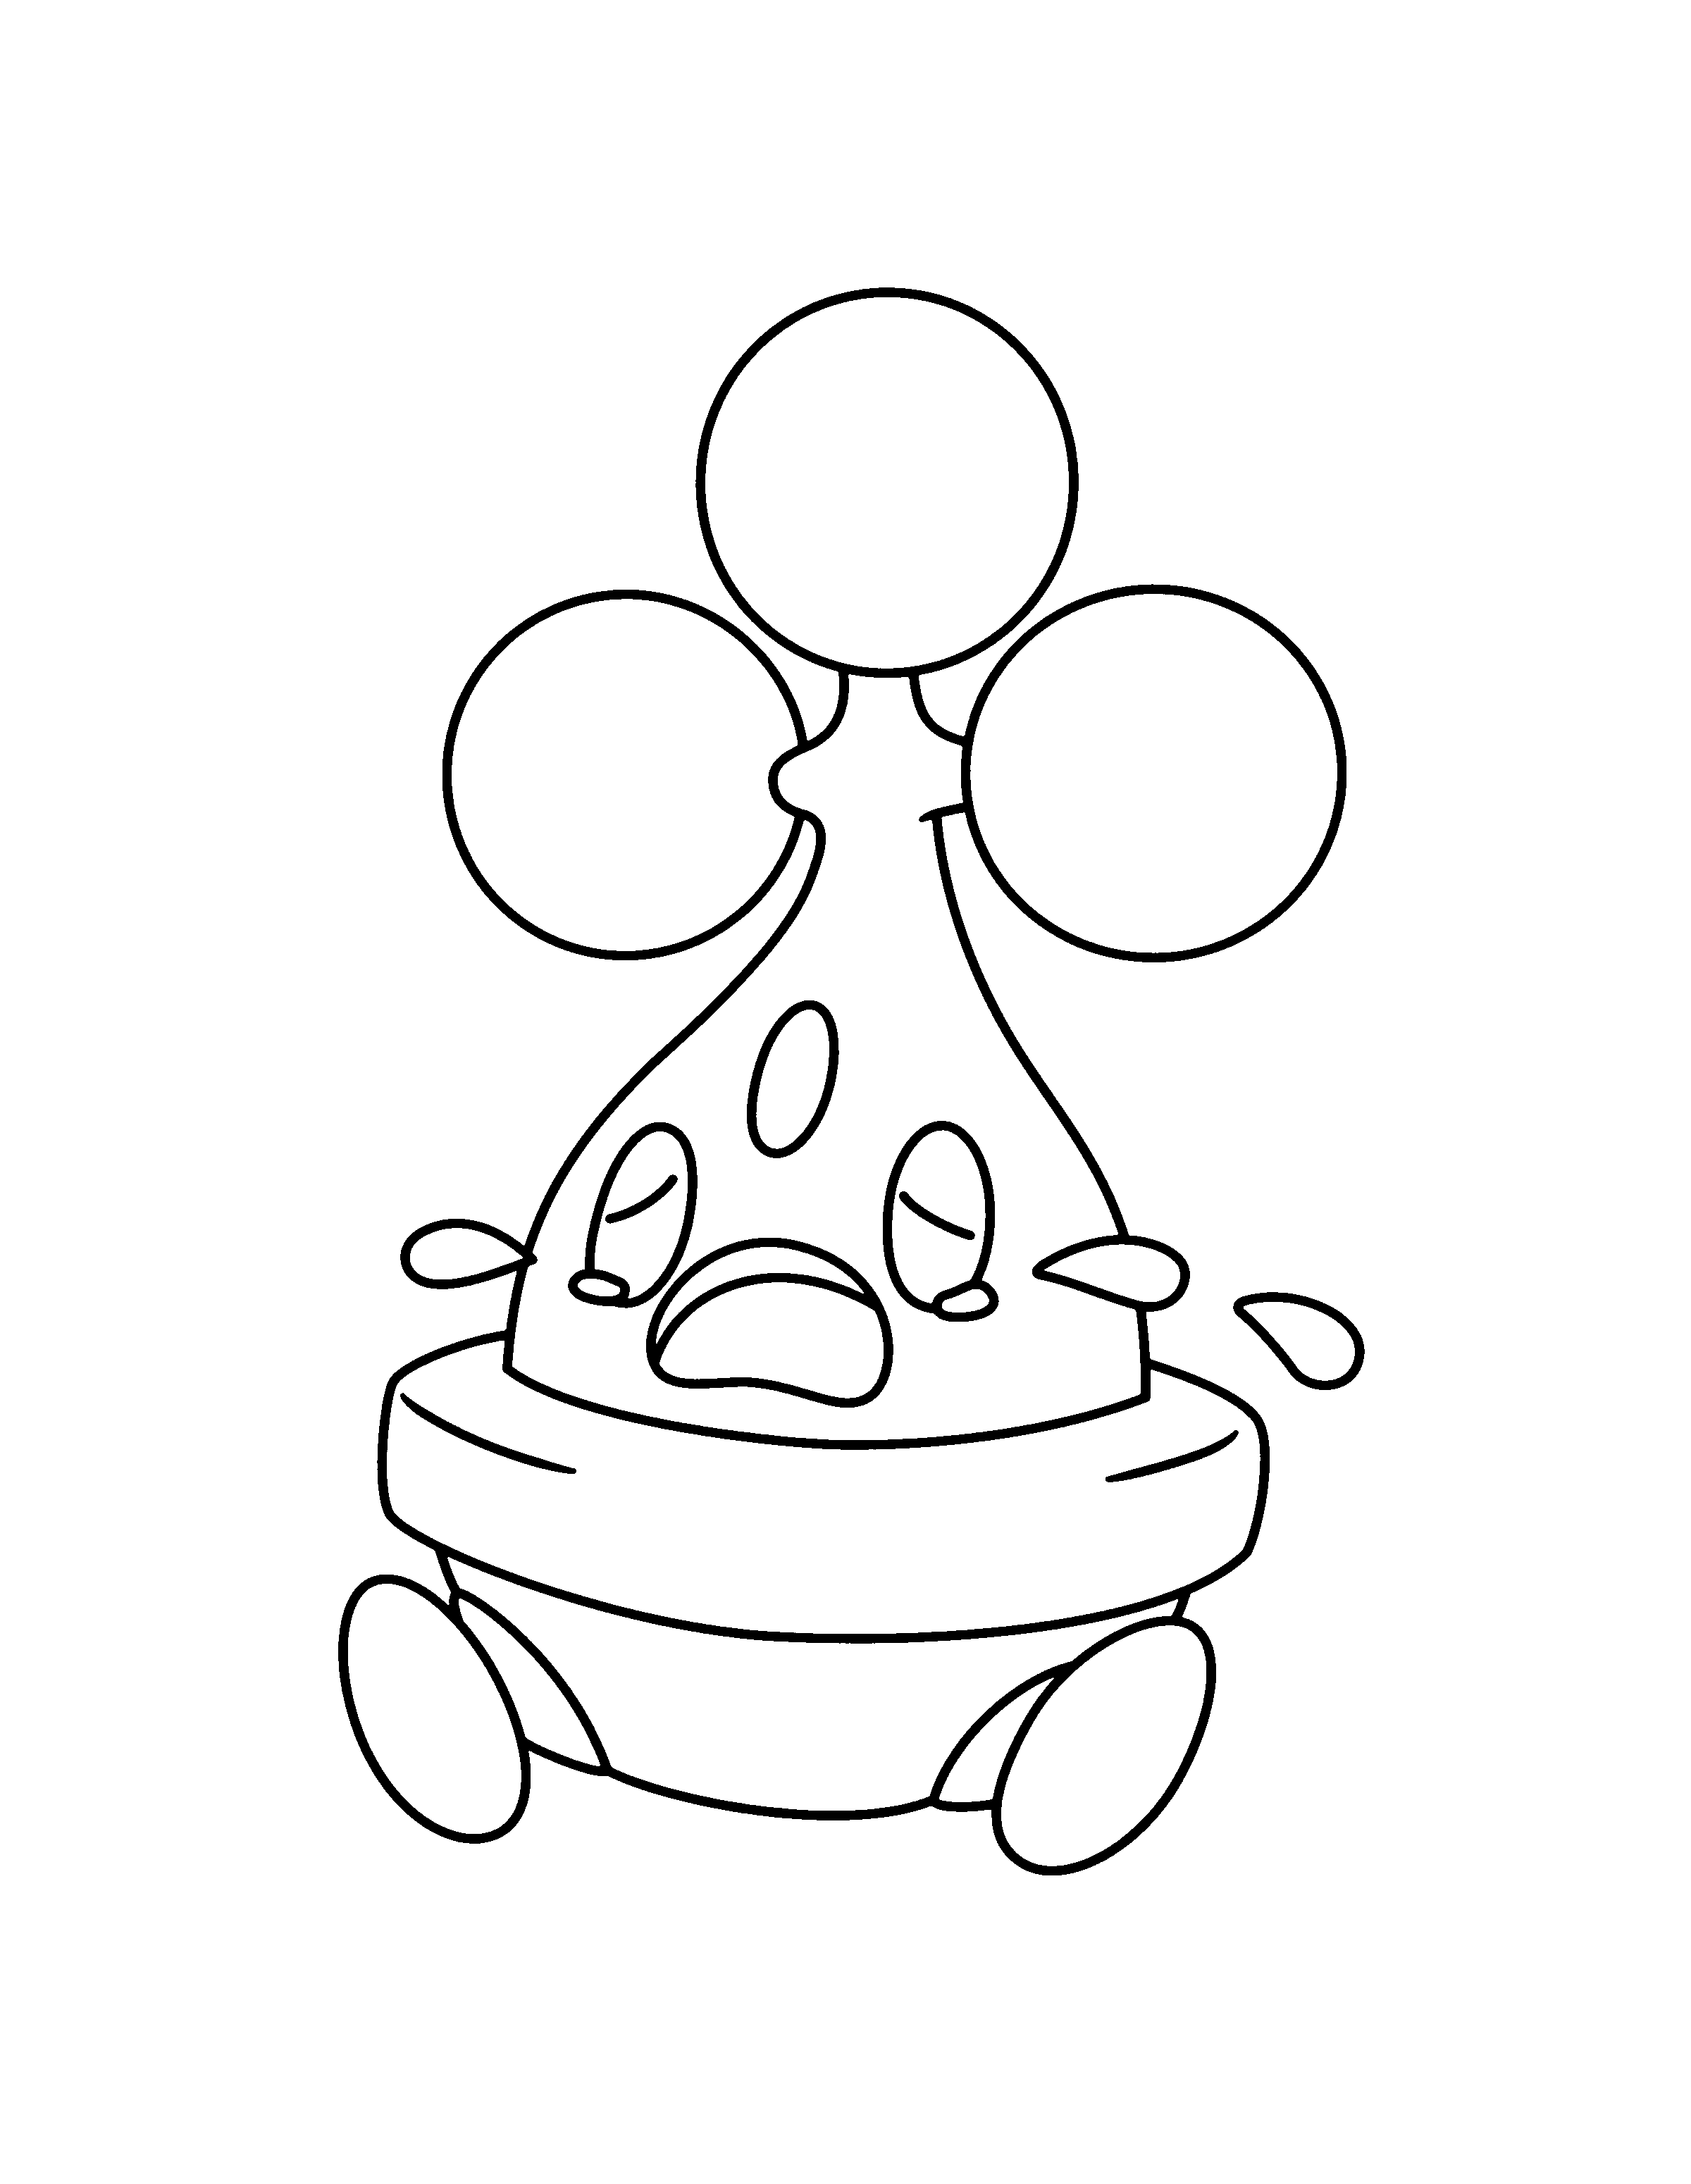 animated-coloring-pages-pokemon-image-0756